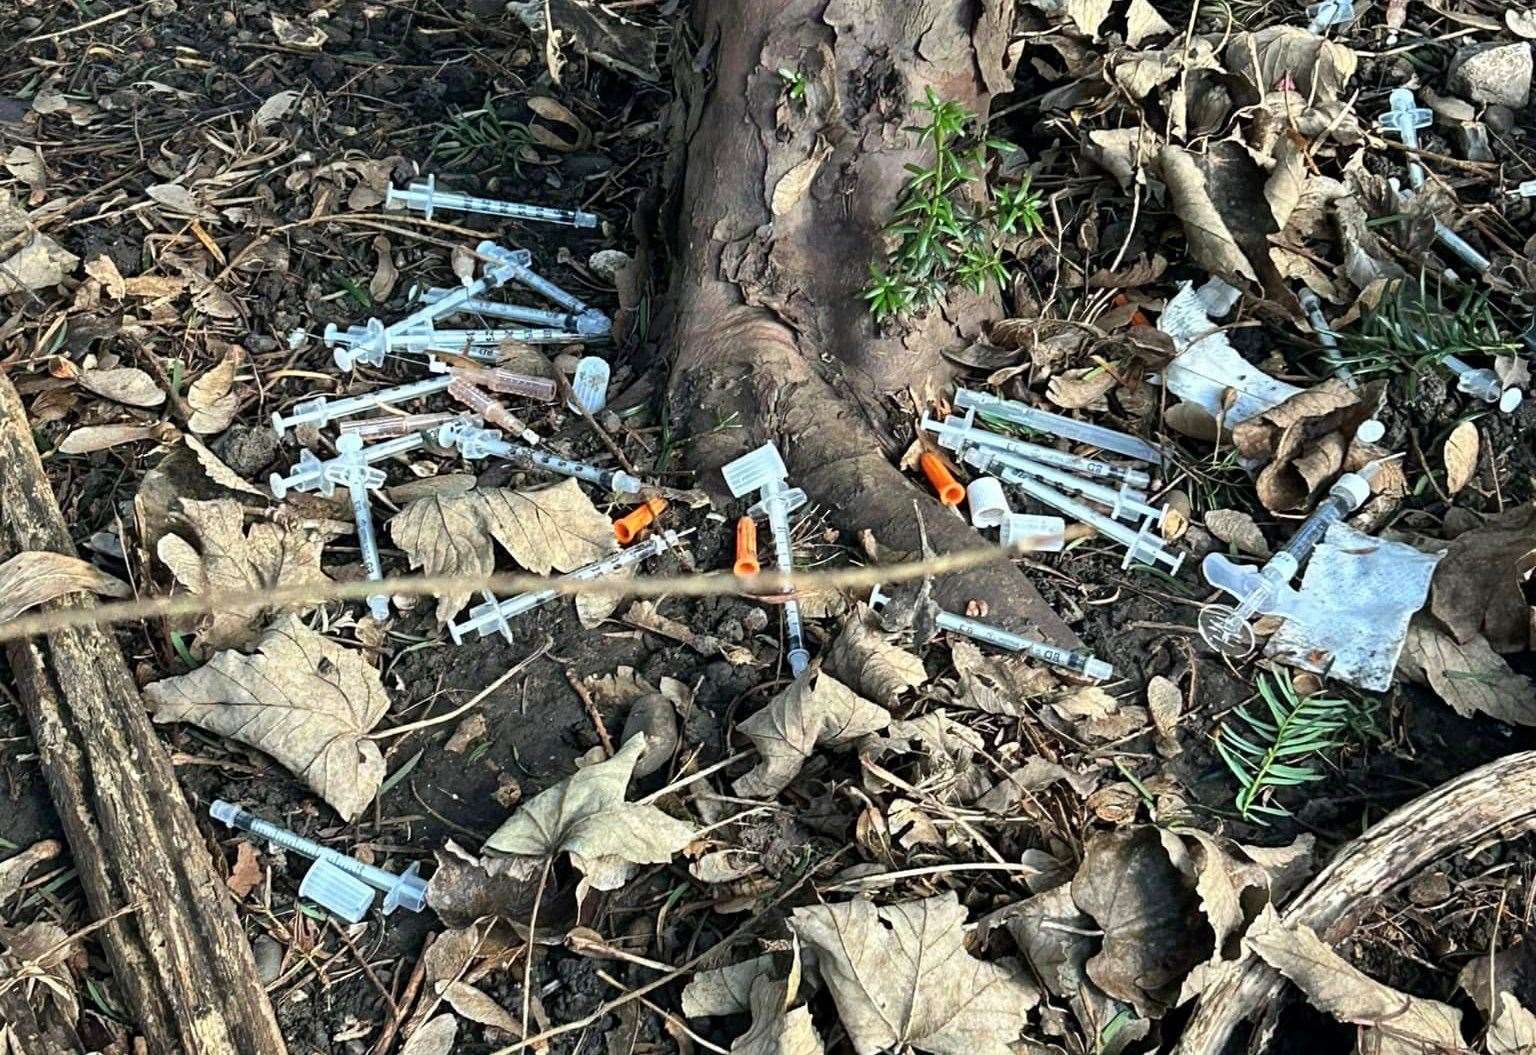 More than 60 used needles were discarded off a footpath in Sutton at Hone